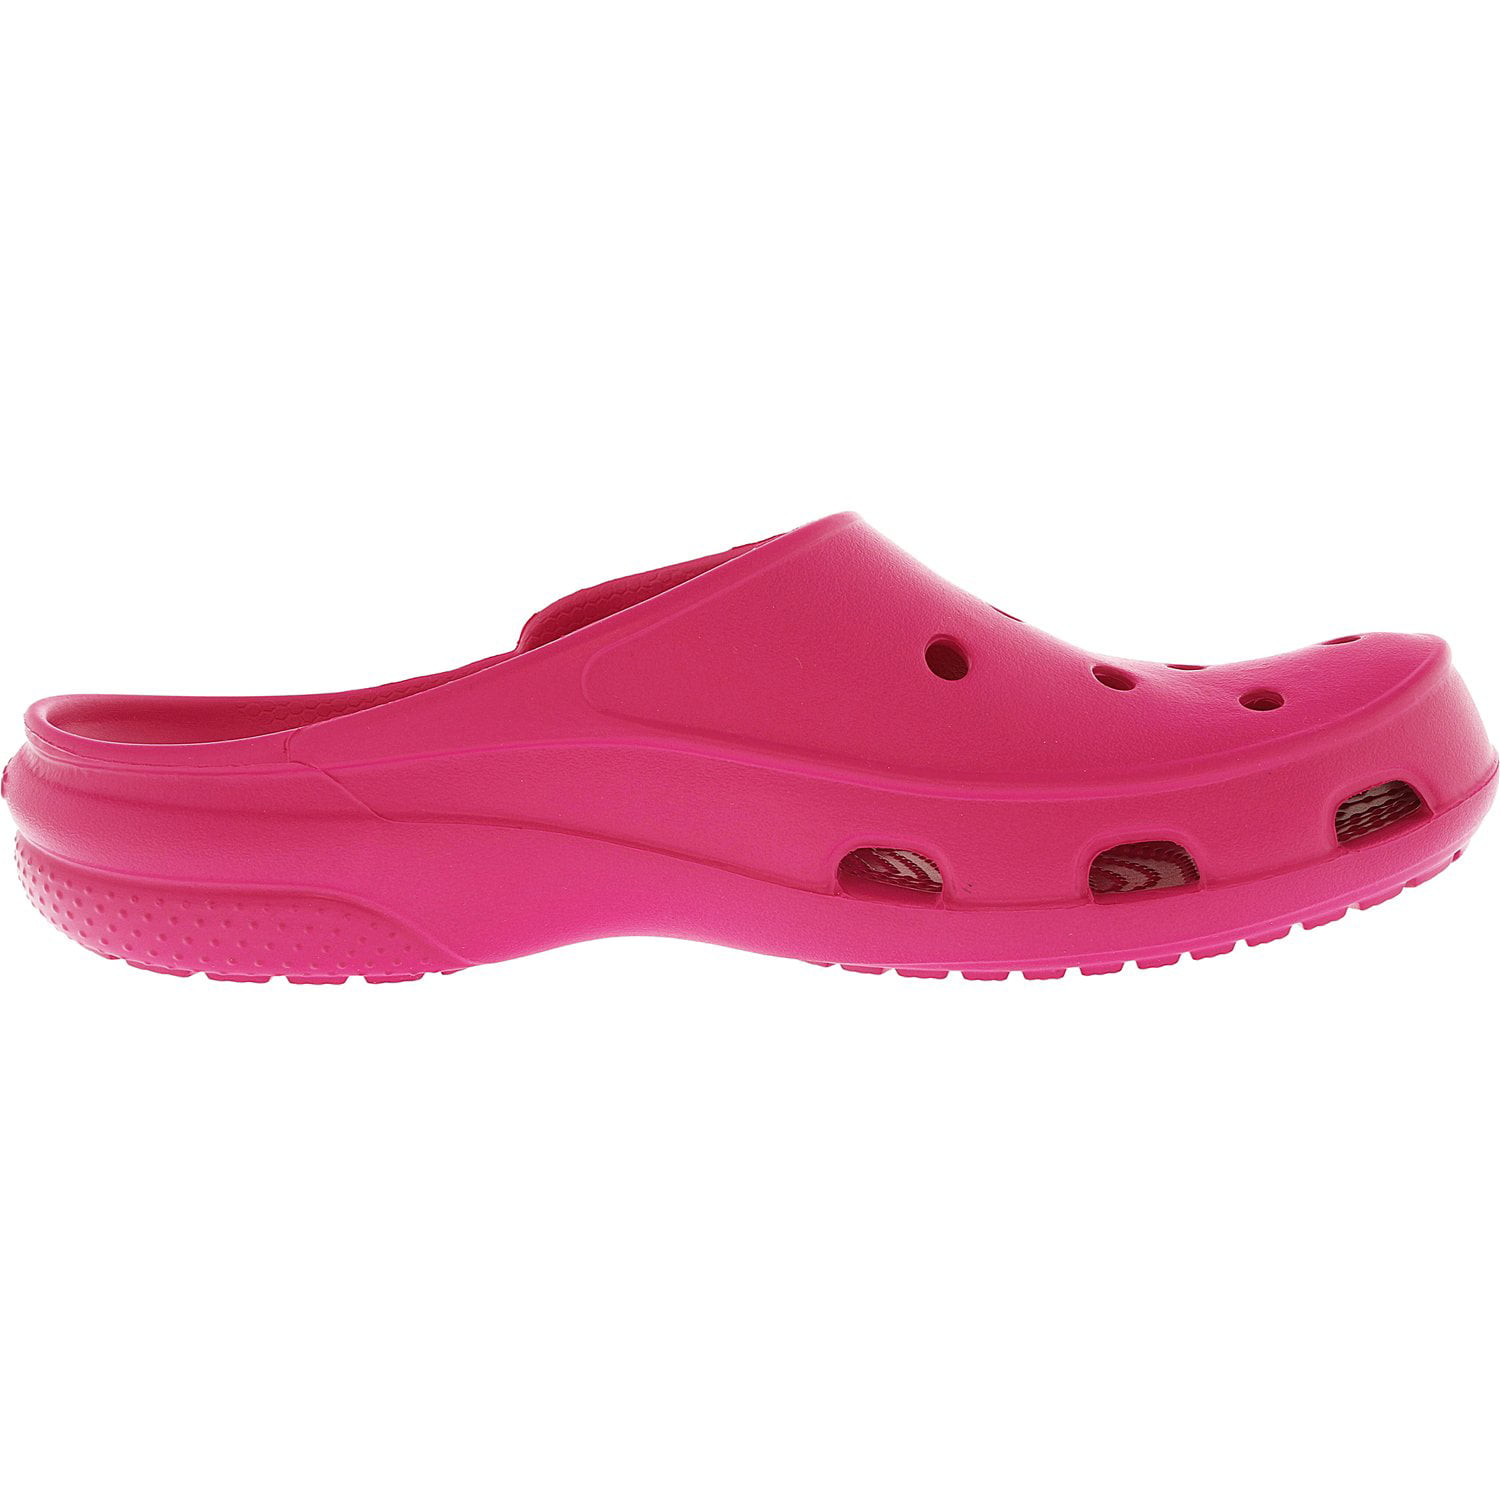 70 Limited Edition Croc style shoes walmart for Women